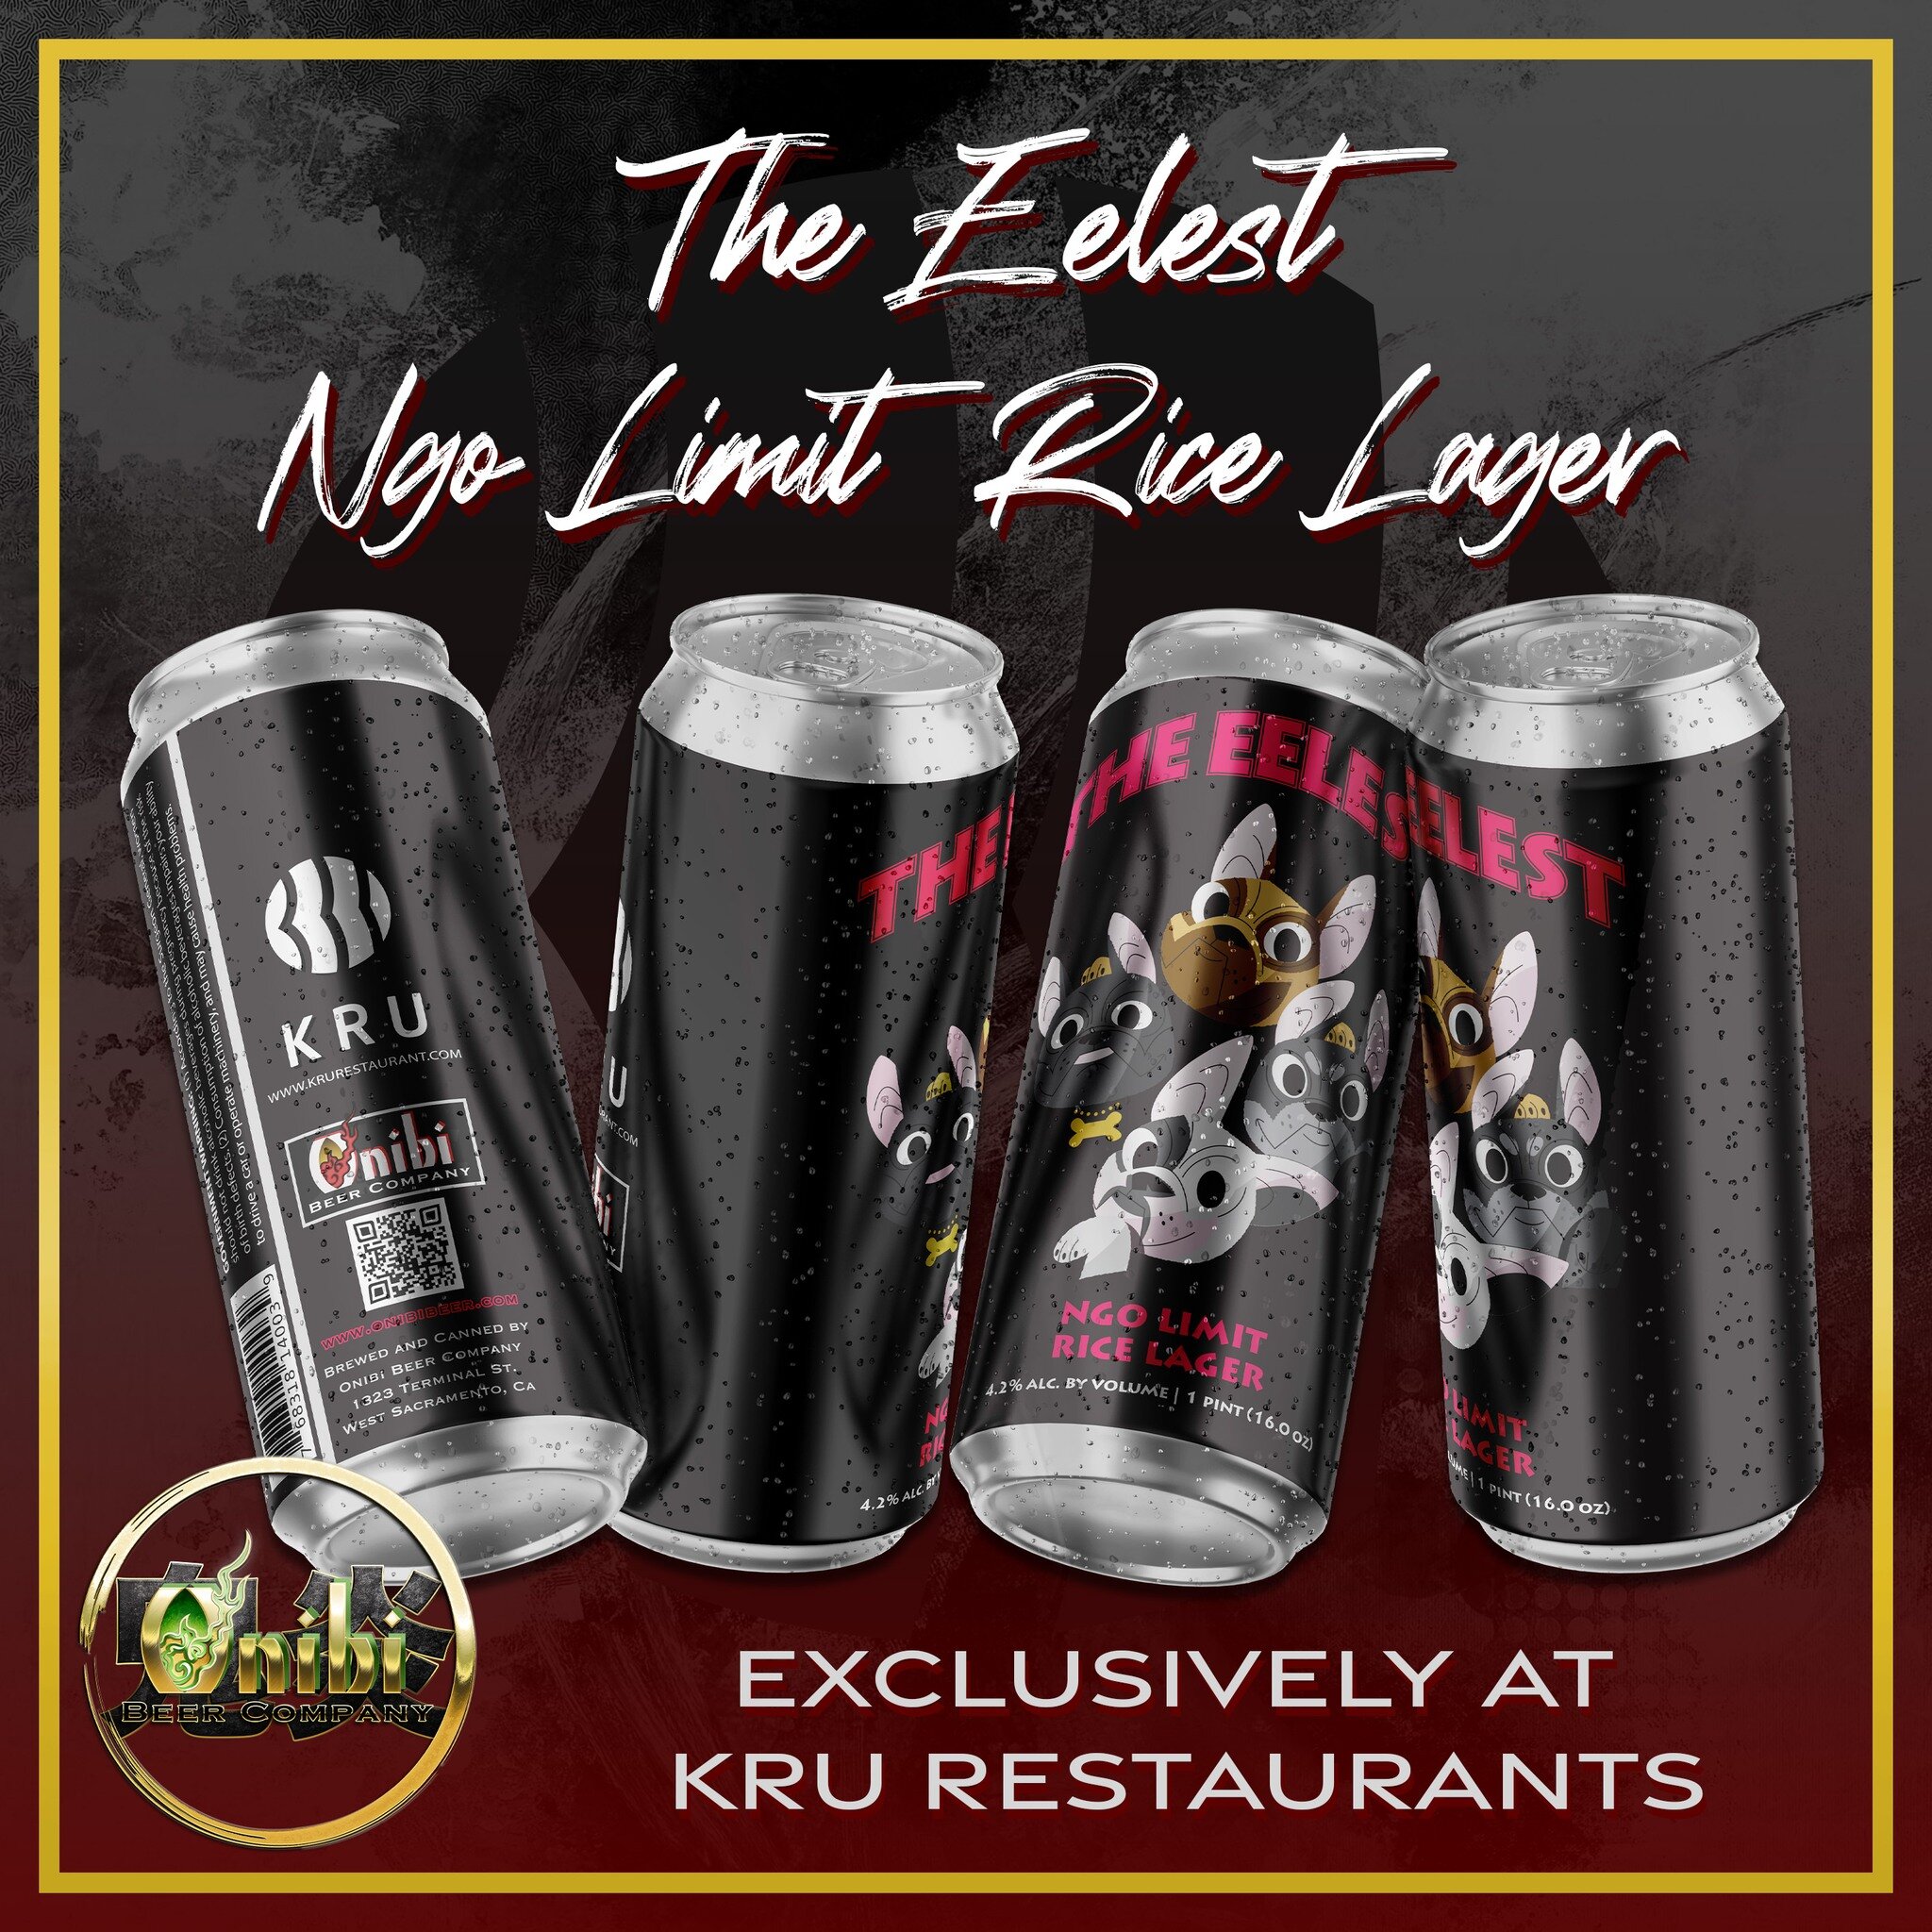 Introducing The Eelest - Ngo Limit Rice Lager.  Brewed and served exclusively at Kru Contemporary Japanese Cuisine and Kru Restaurants! Cheers! 🍻
@krusacramento 
.
.
.
.
.
.
#onibibeer #beer #drinklocal #craftbeer #sacramento #microbrew #onibi #west